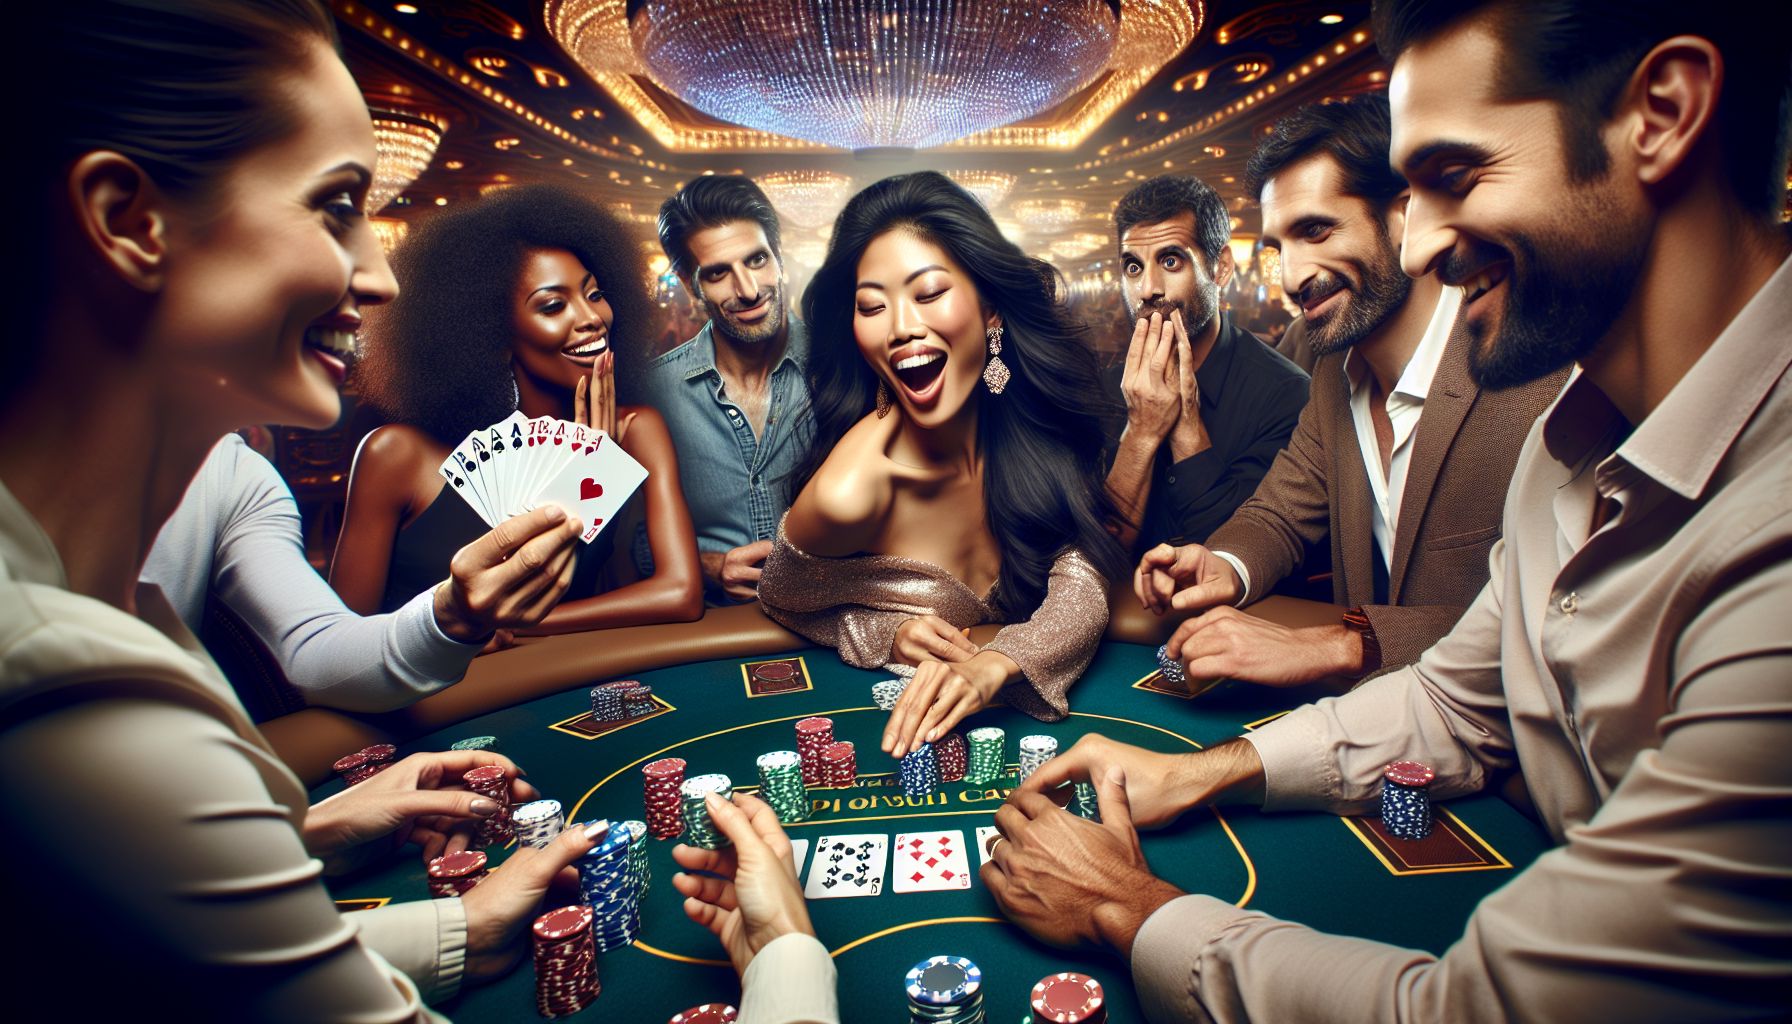 Winning Big: Success Stories from the Casino Poker Tables